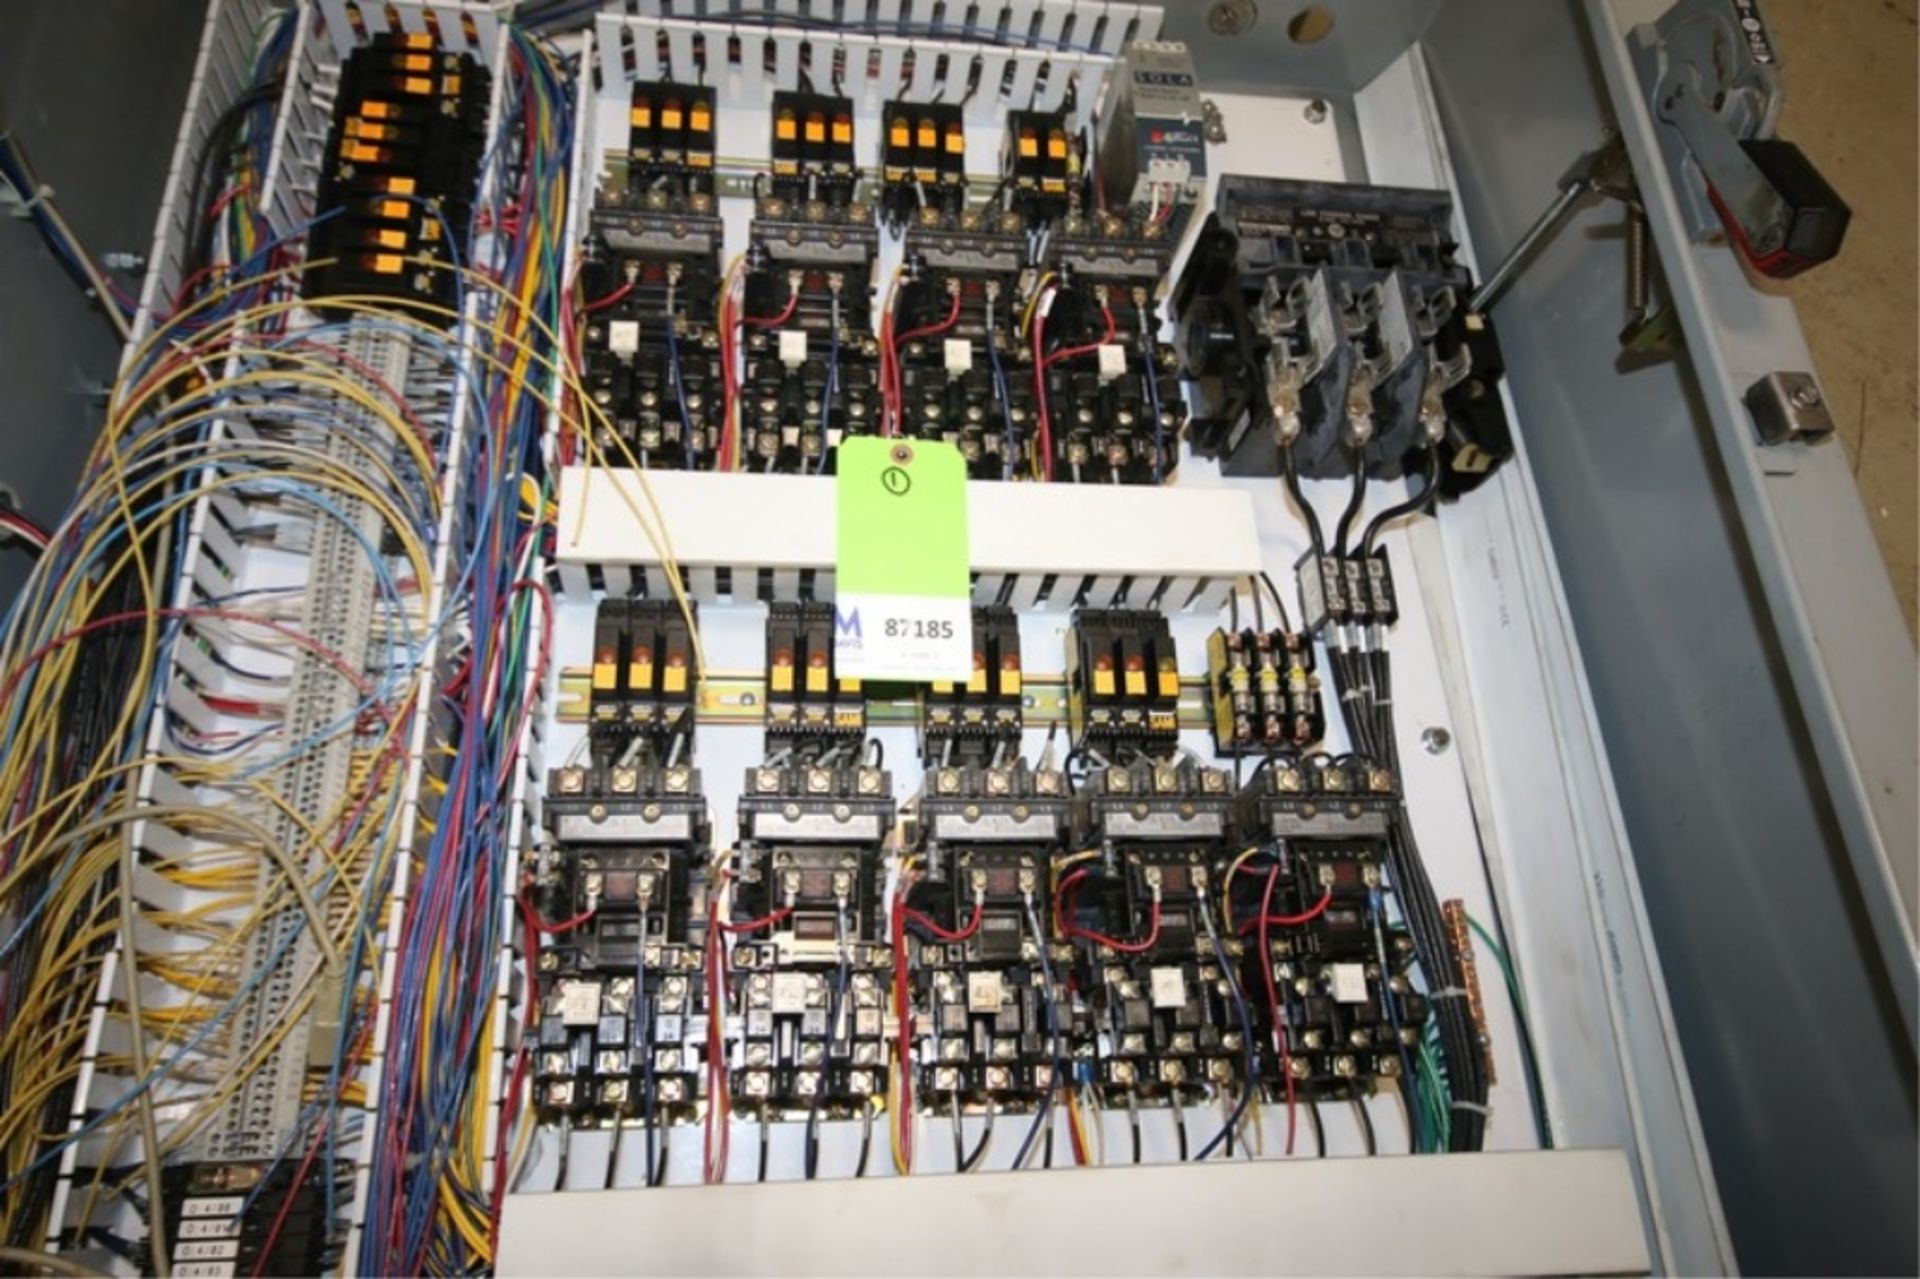 Hubbell 4' H x 3' W x 12" D Production Control Panel with Allen Bradley 10- Slot PLC Controller - Image 3 of 5